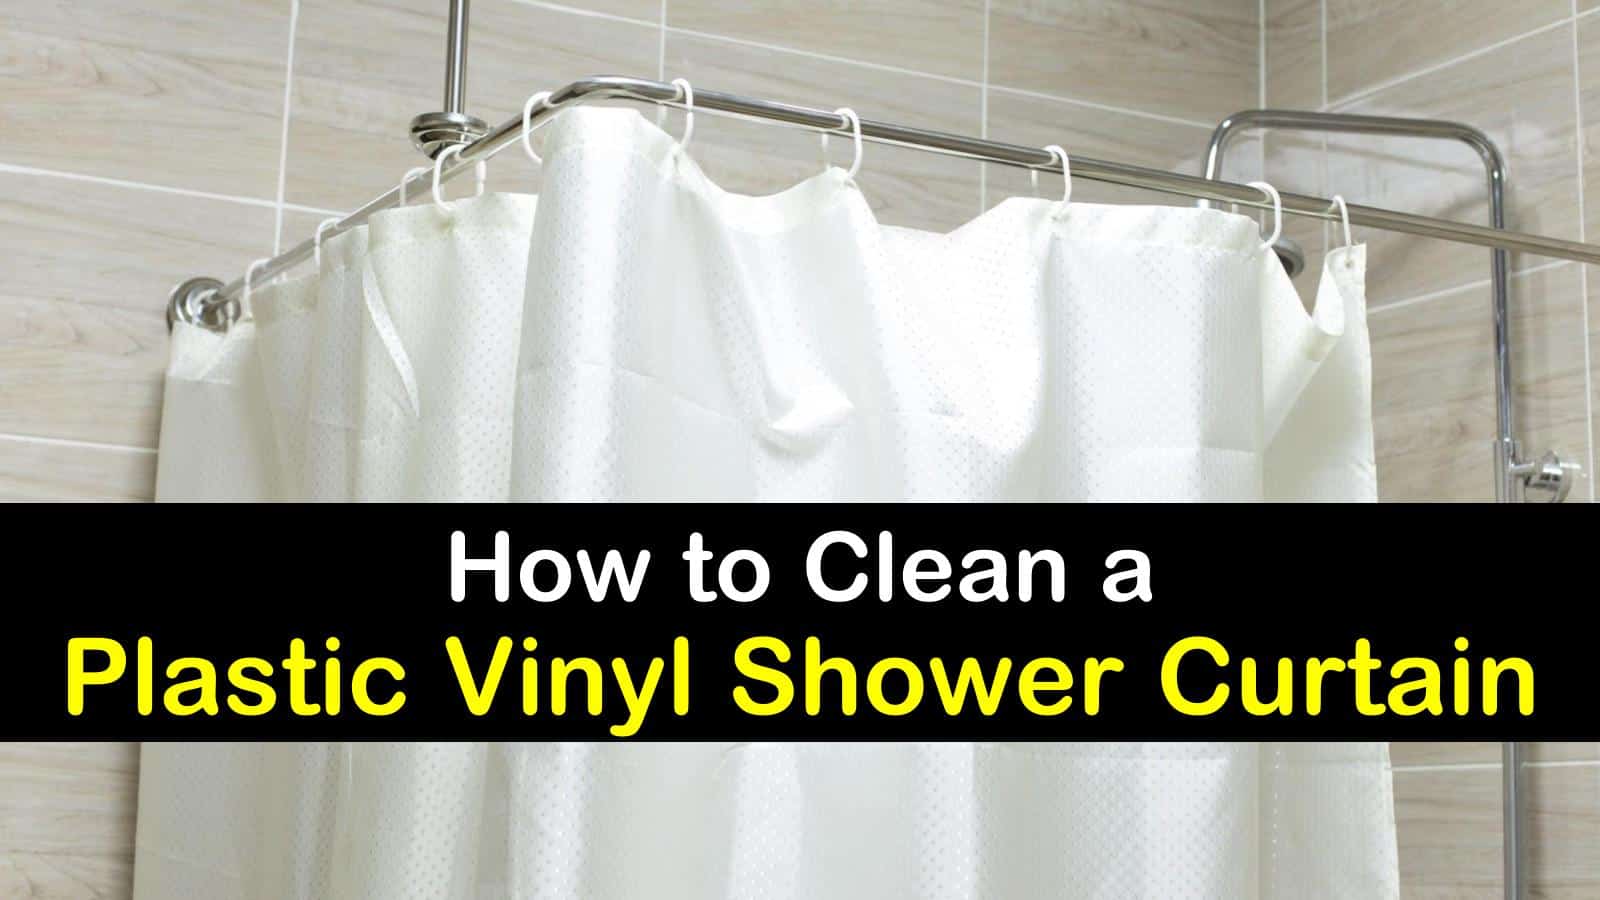 5 Excellent Ways To Clean A Shower Curtain, How Do You Wash A Plastic Shower Curtain Liner